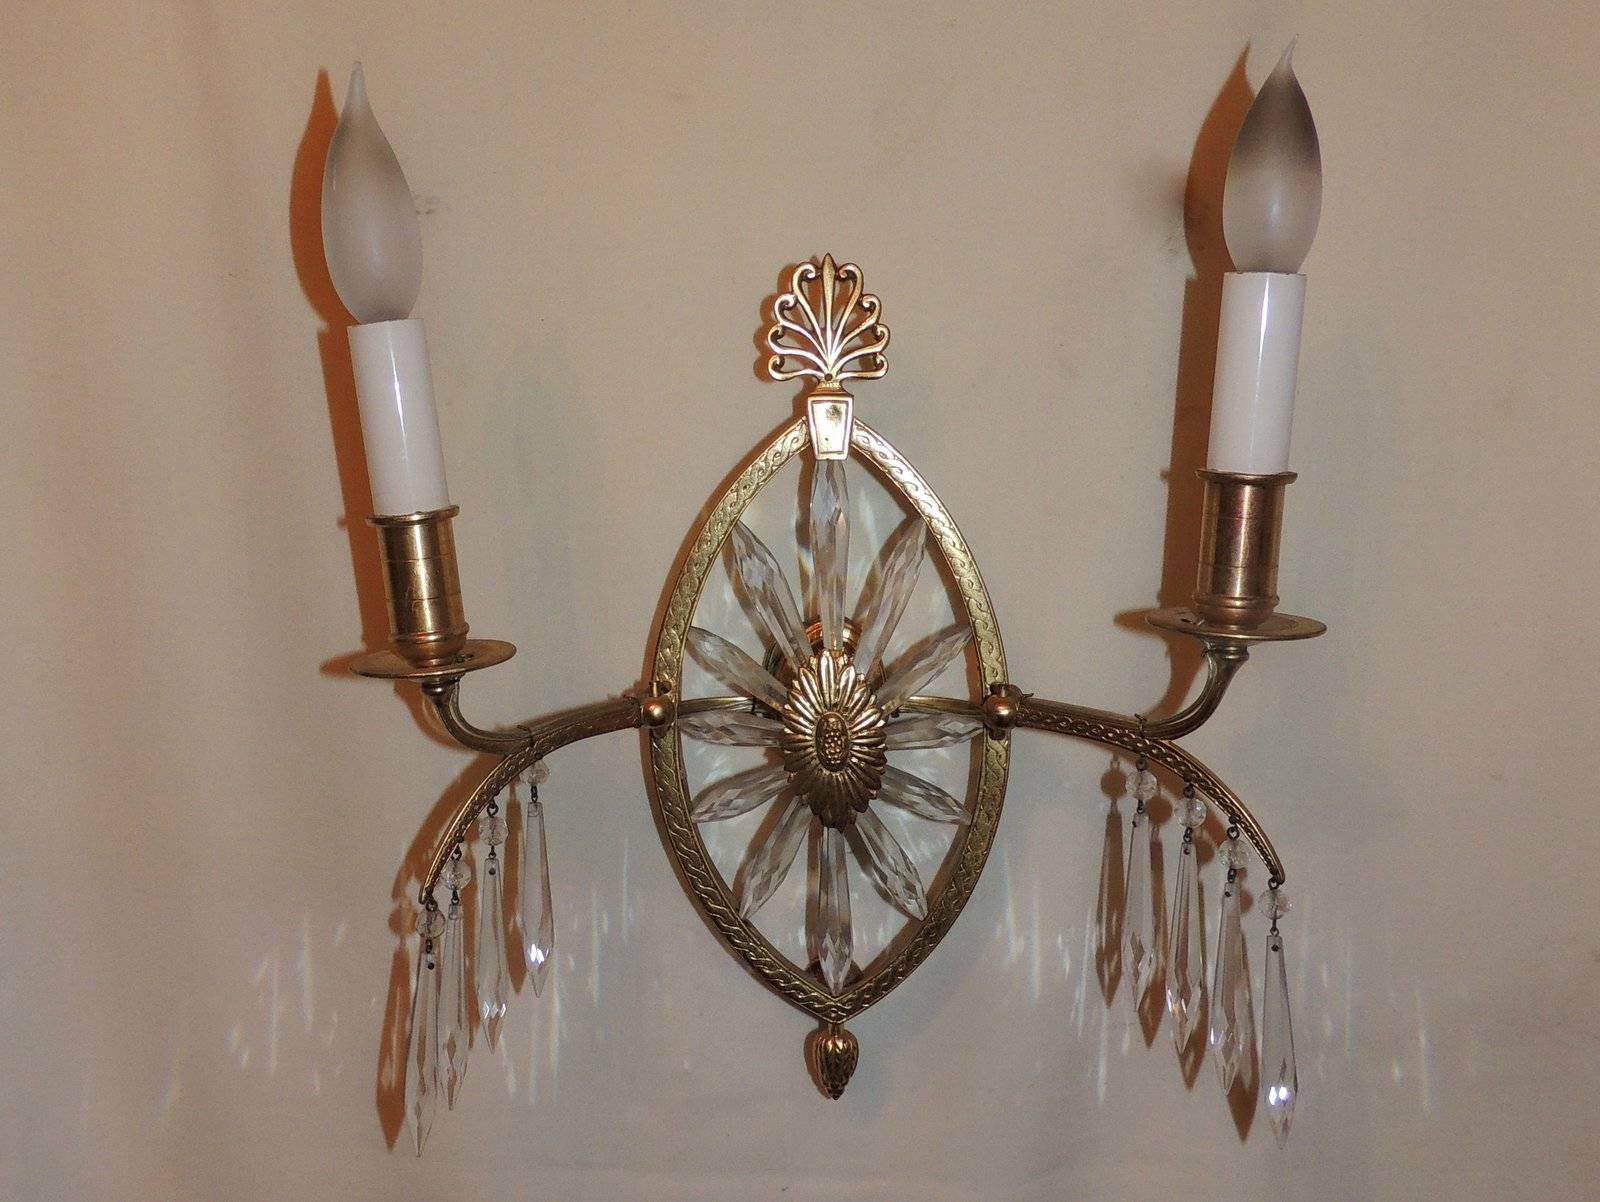 A wonderful neoclassical French bronze and crystal set of Six sconces in the manner of Caldwell with two arms that are adjustable and a center starburst with crystal spears.

Rewired and ready to install

Three pairs available, sold